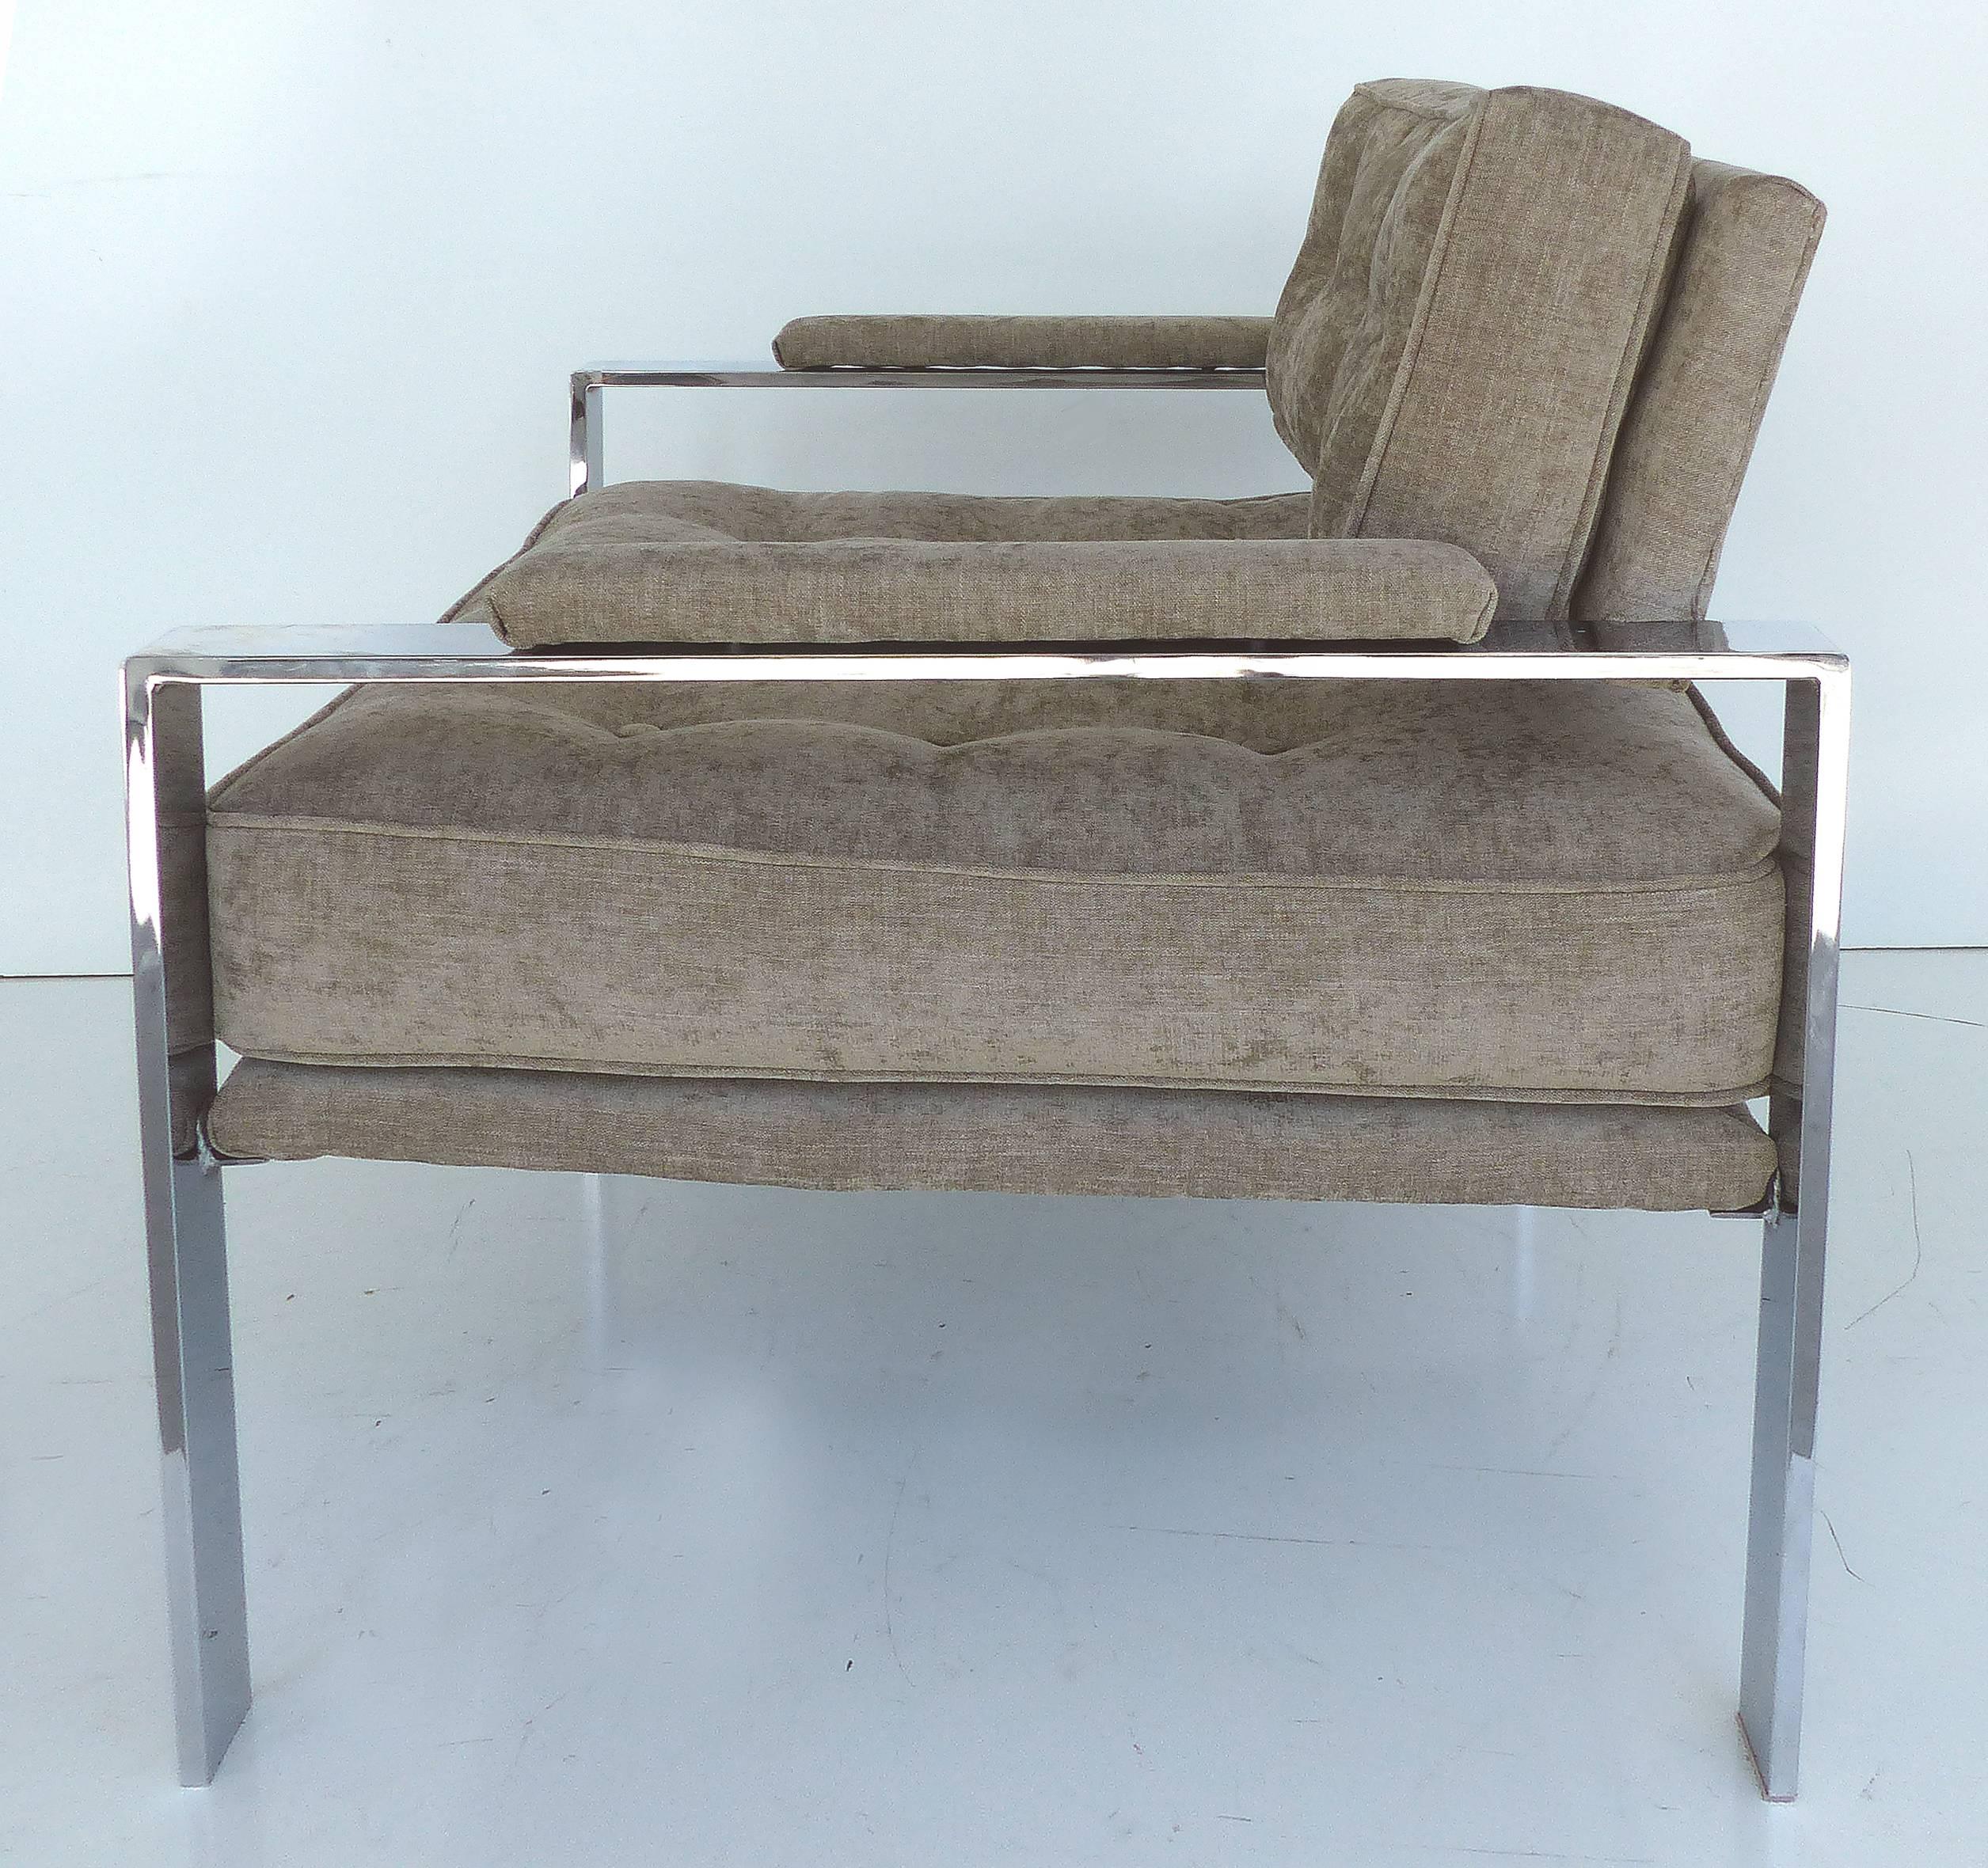 Mid-Century Modern Chrome Club Chairs in the Style of Harvey Probber, Pair

Offered is a pair of Mid-Century Modern chrome club chairs created in the style of Harvey Probber newly upholstered in a close cropped chenille type fabric that is quite